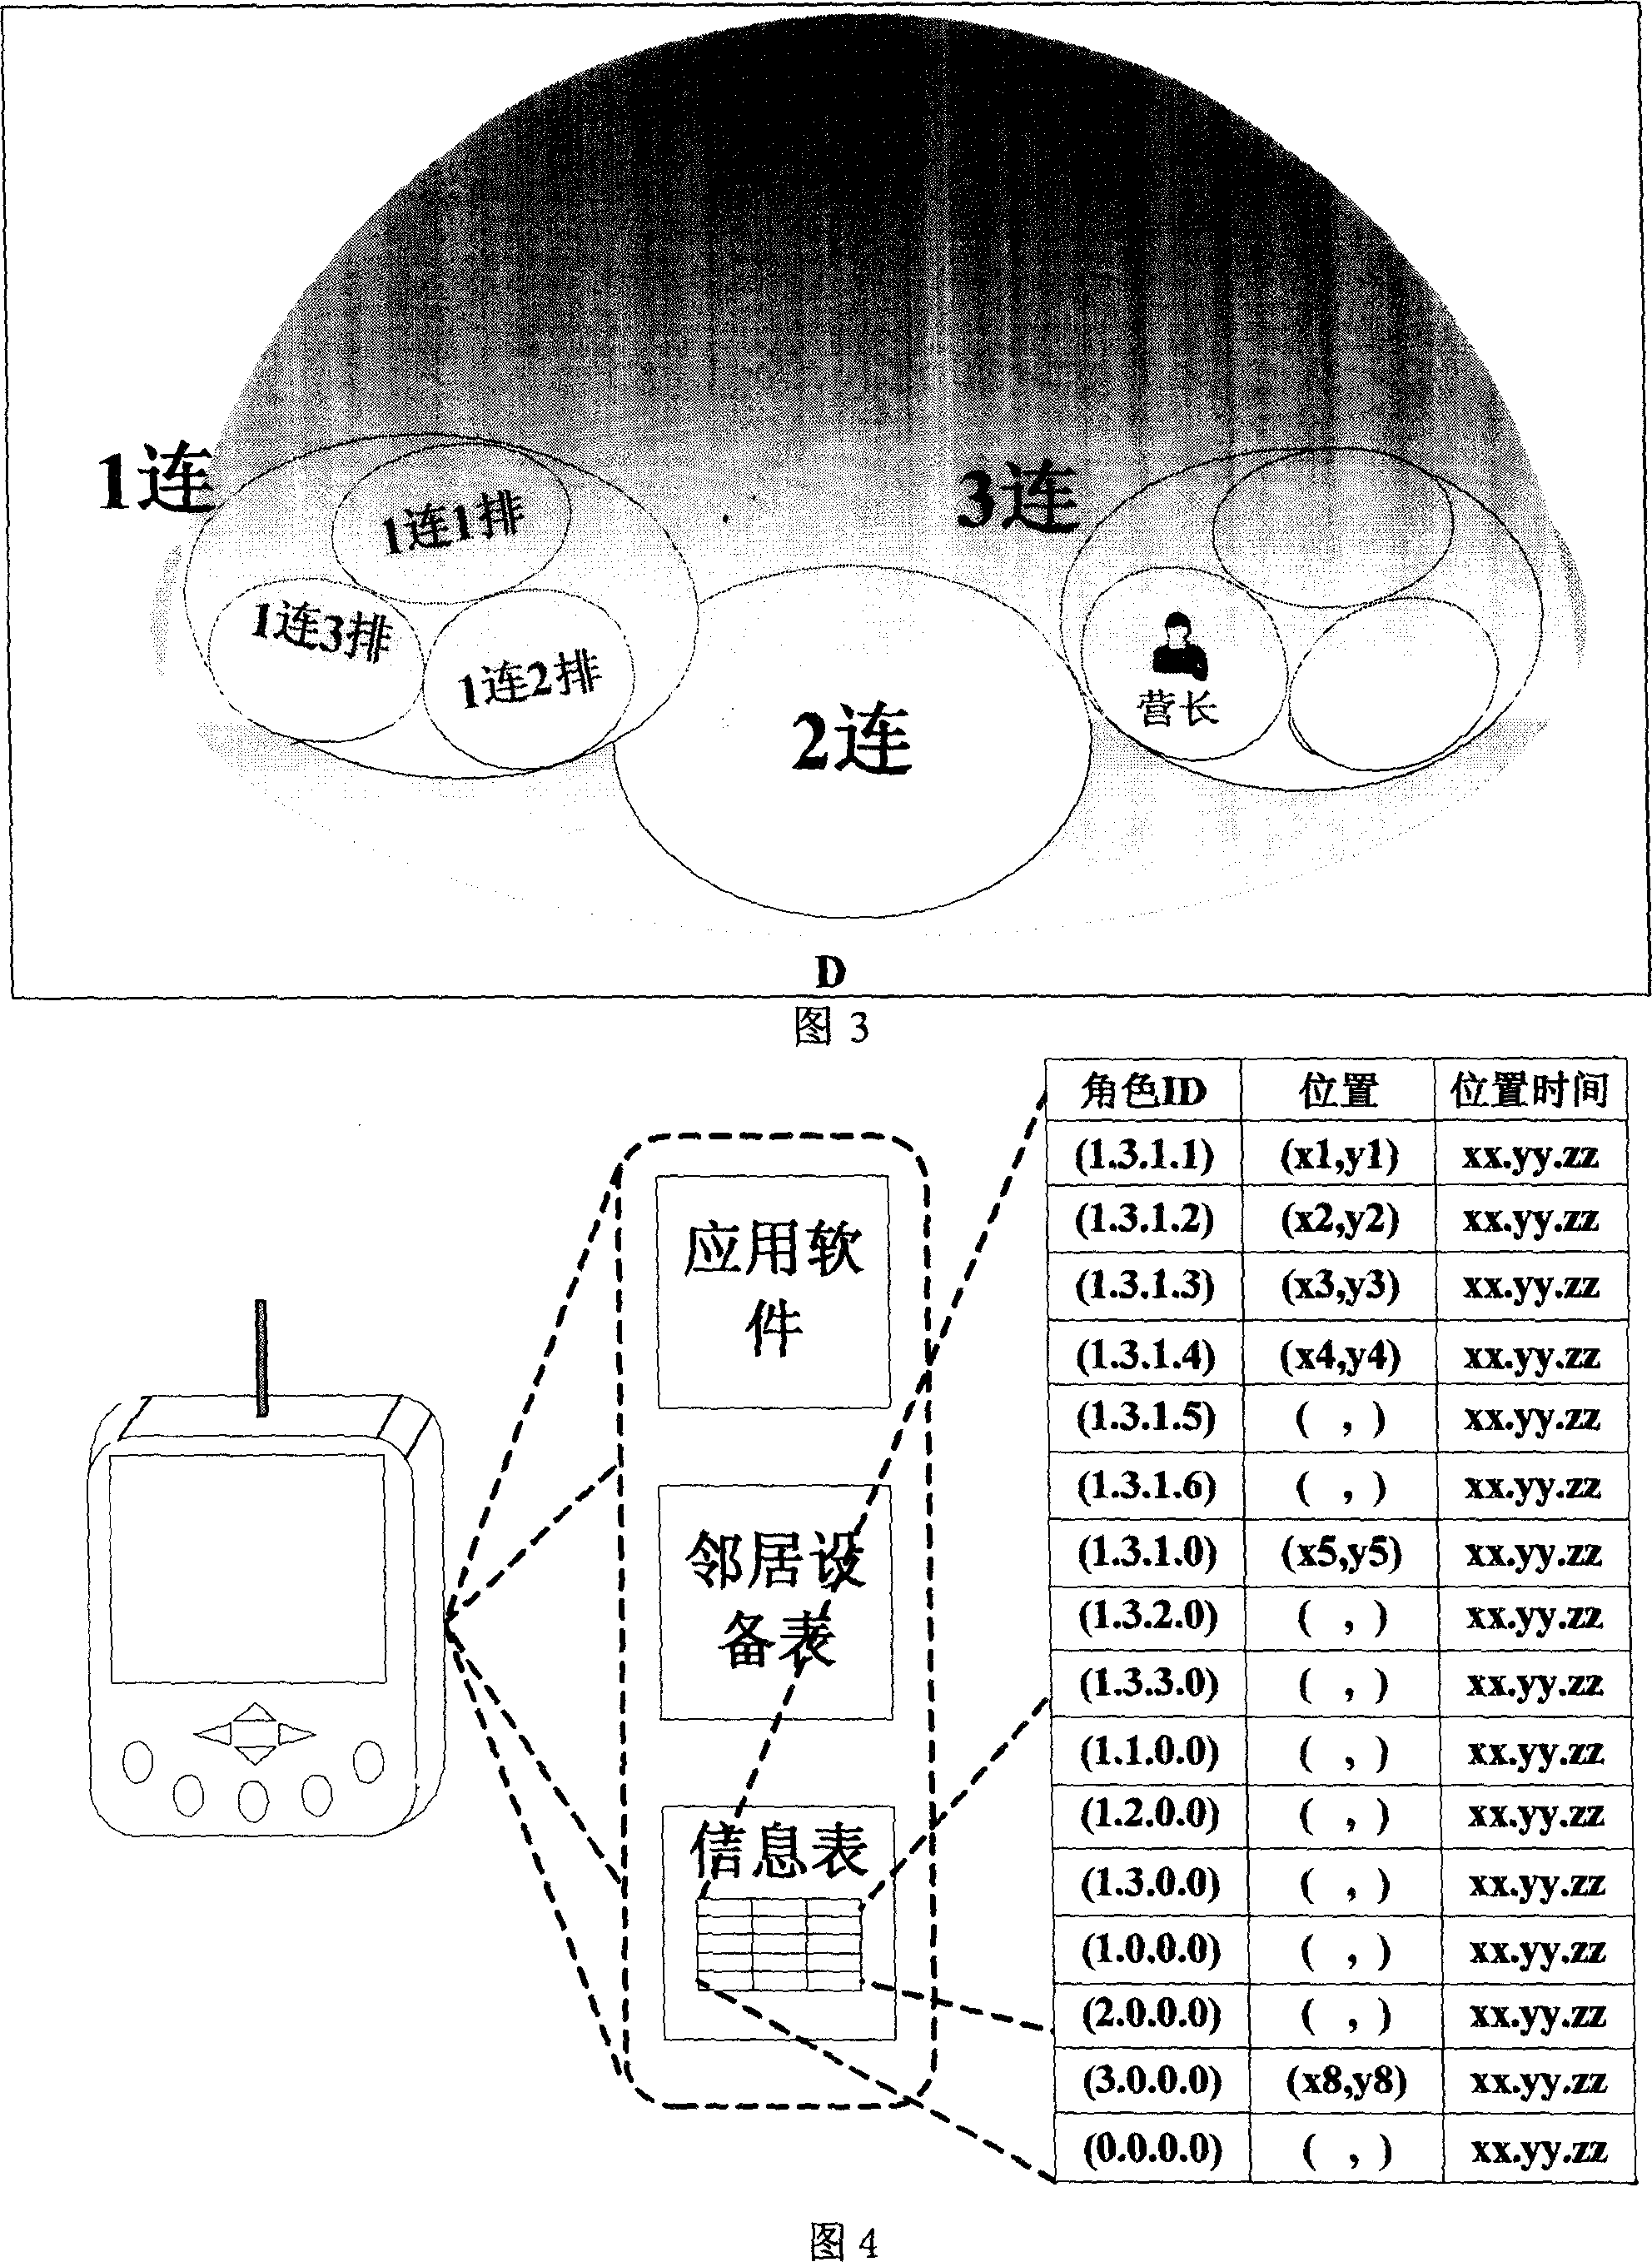 Highly dynamic radio router and routing method for constructing non IP network with location assistance